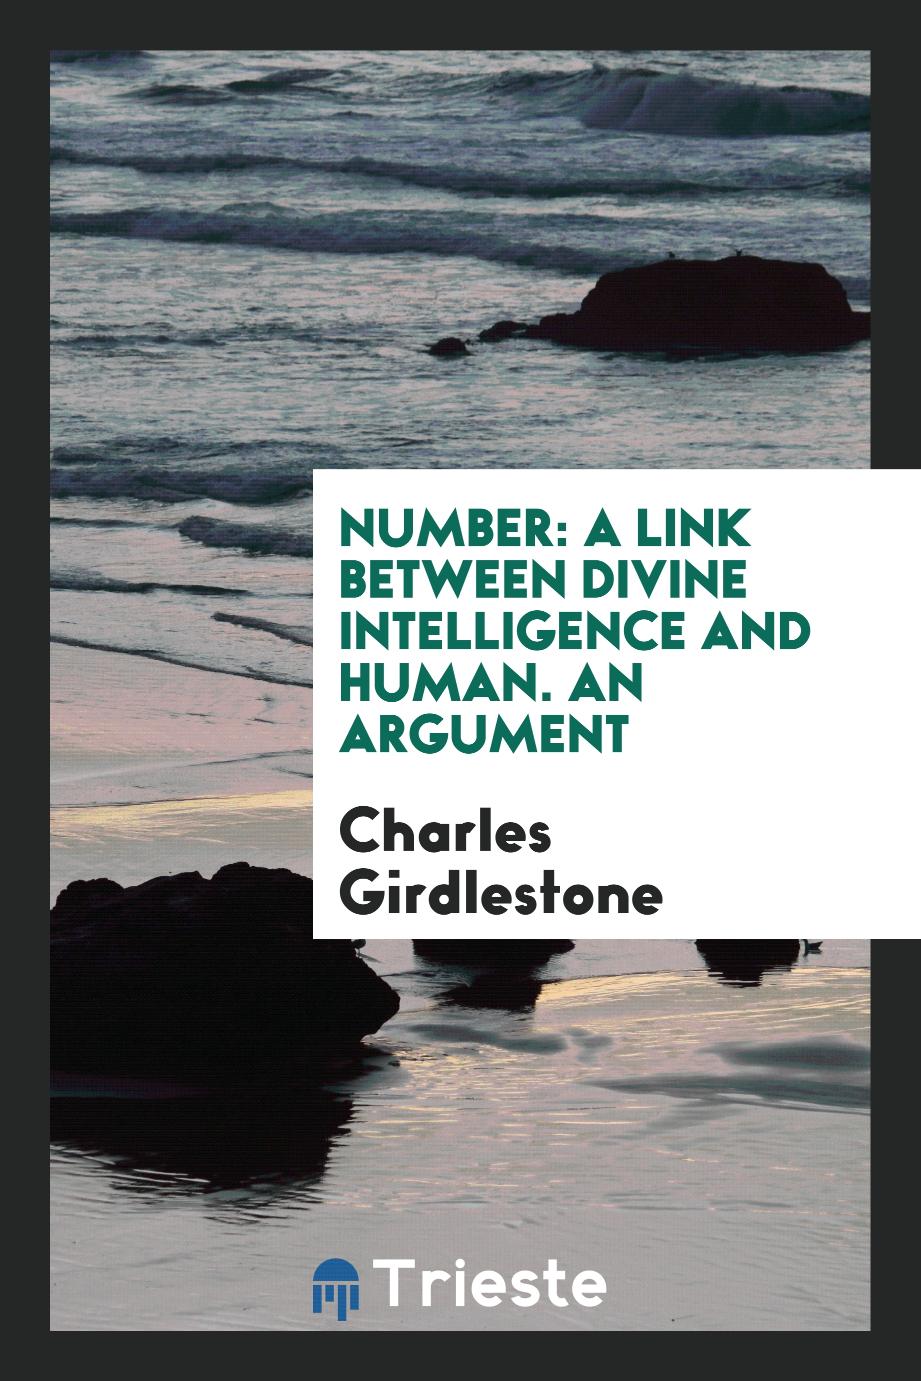 Number: A Link Between Divine Intelligence and Human. An Argument